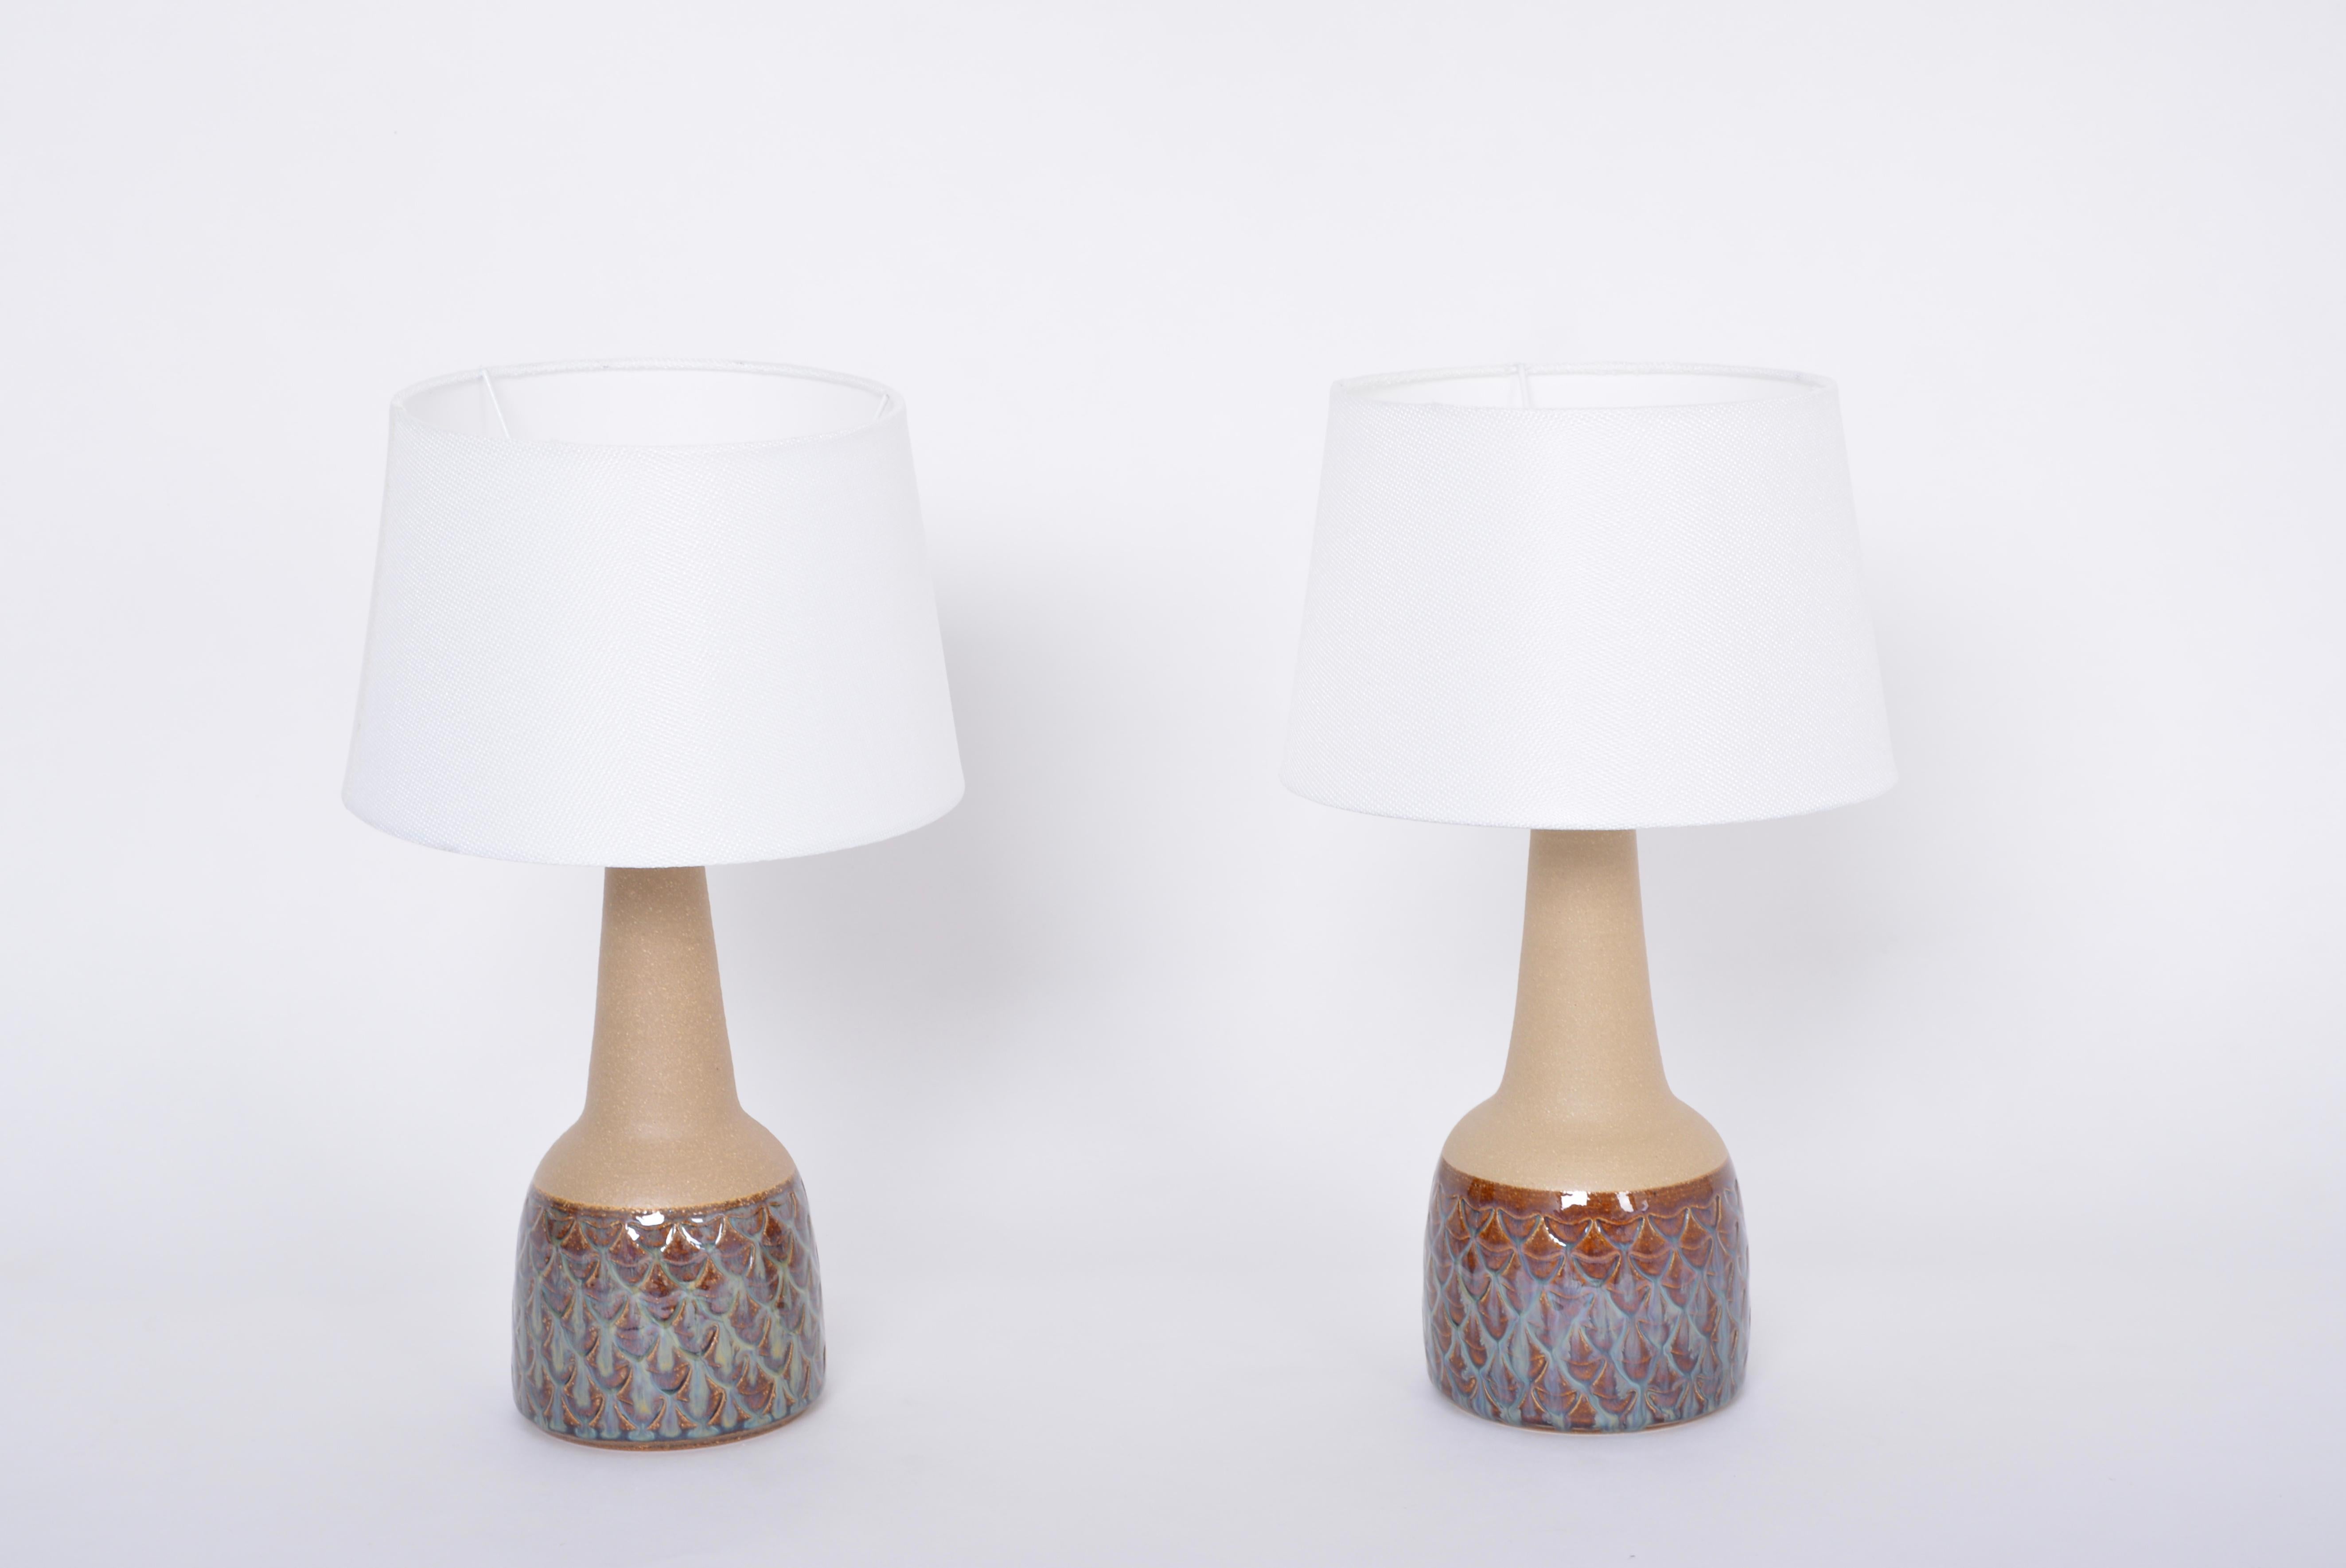 Pair of Midcentury Handmade Table Lamps Model 3012 by Einar Johansen for Soholm

This pair of stoneware table lamps was designed by Einar Johansen and handmade on the Danish island of Bornholm by the company Soholm Stentoj (stoneware in Danish) in